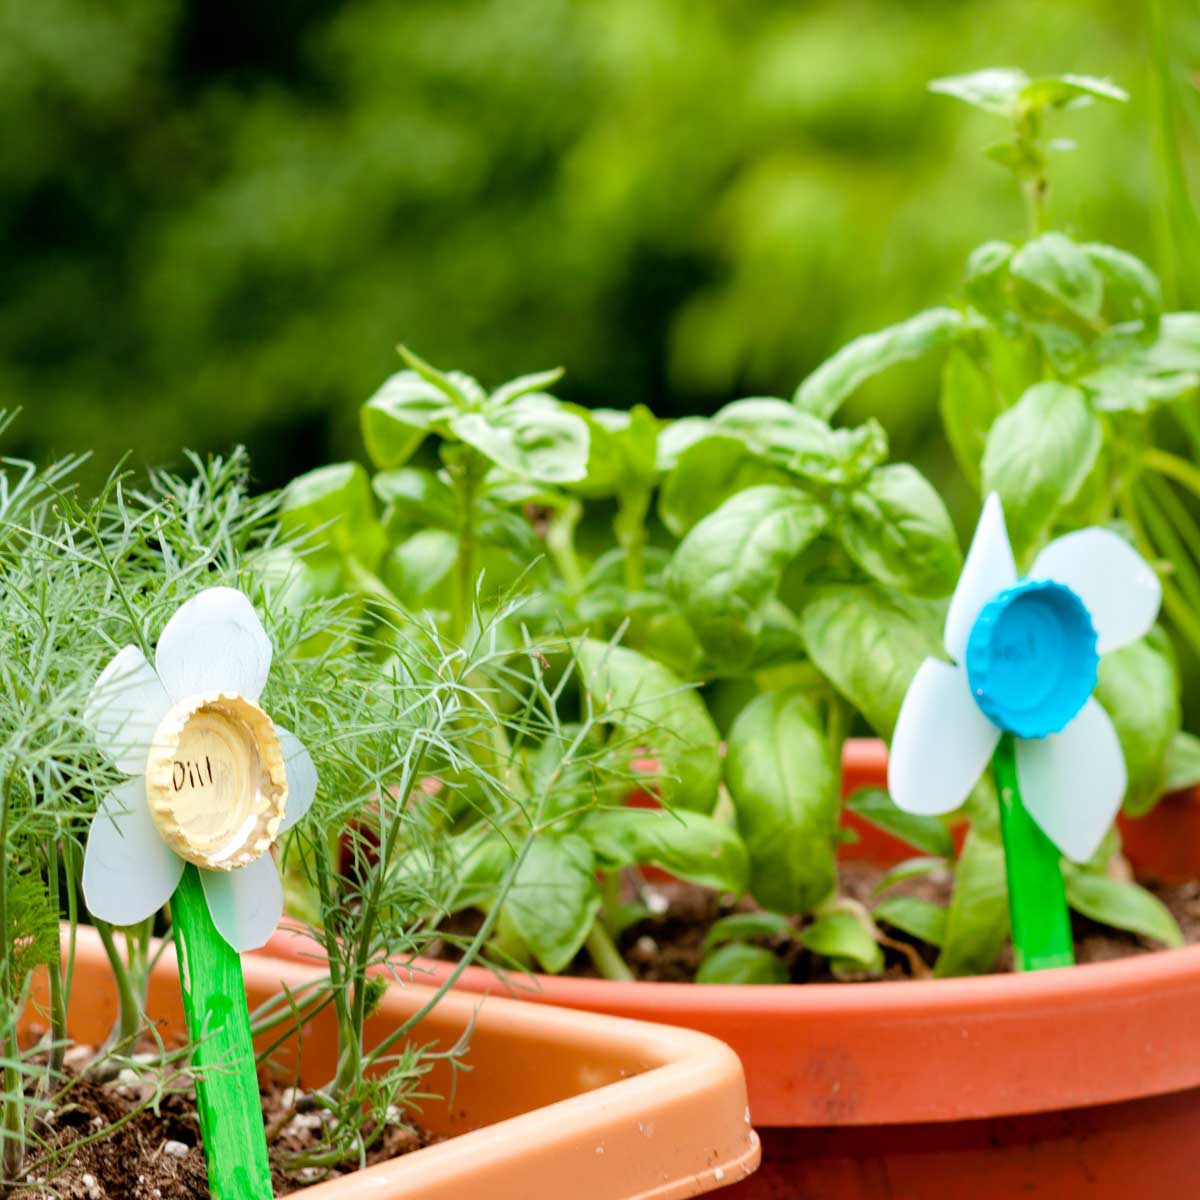 Kid-made garden markers are in pots of fresh herbs.